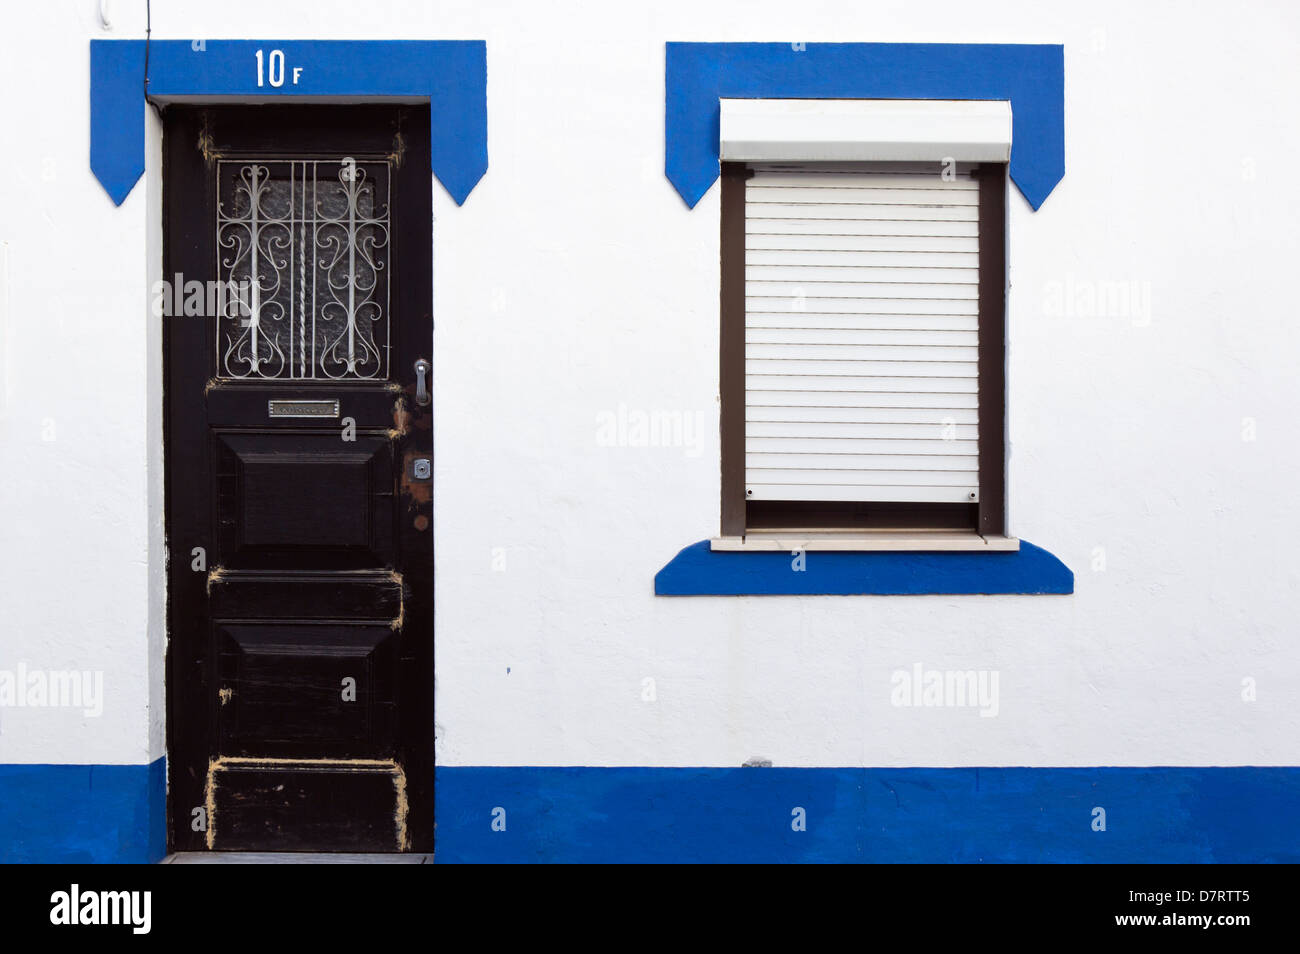 Portugal. Door and window set in blue and white painted wall. Stock Photo